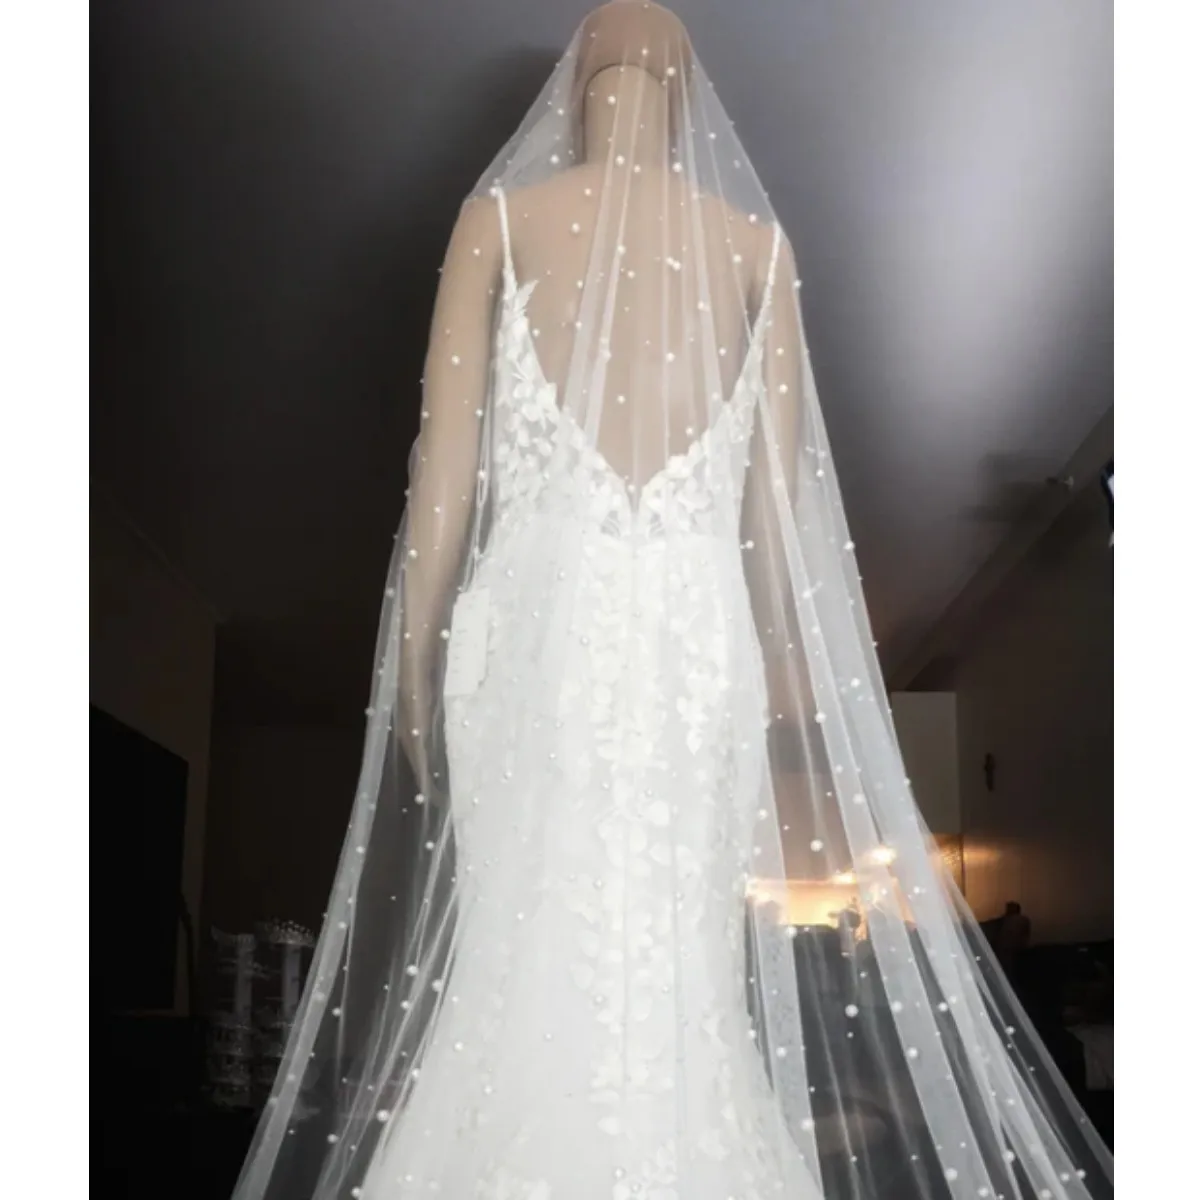 

Simple Wedding Veil With Comb Beaded Pearls One Layers Soft Net Sheer Bridal Veils White Ivory Champagne